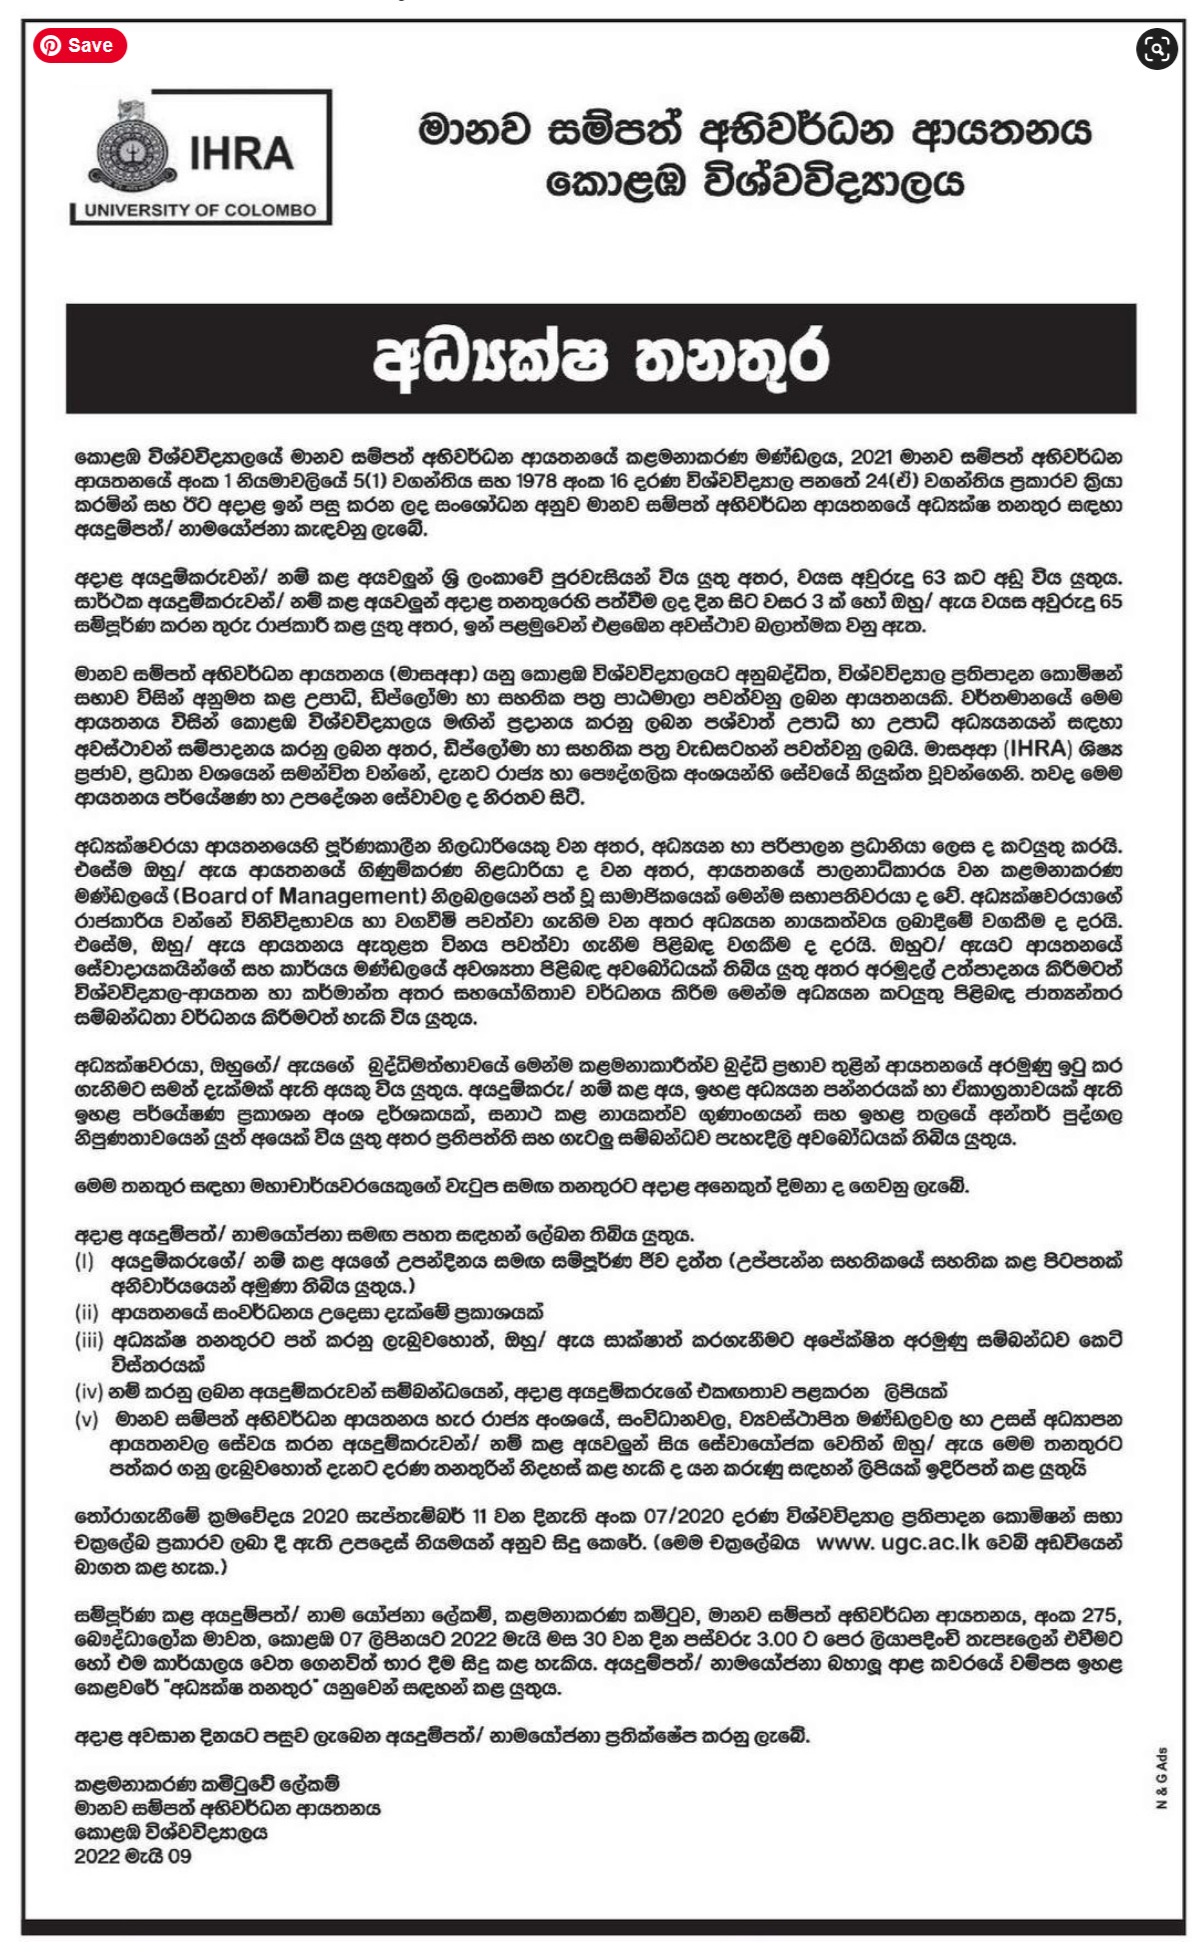 Director Vacancy 2022 at University of Colombo